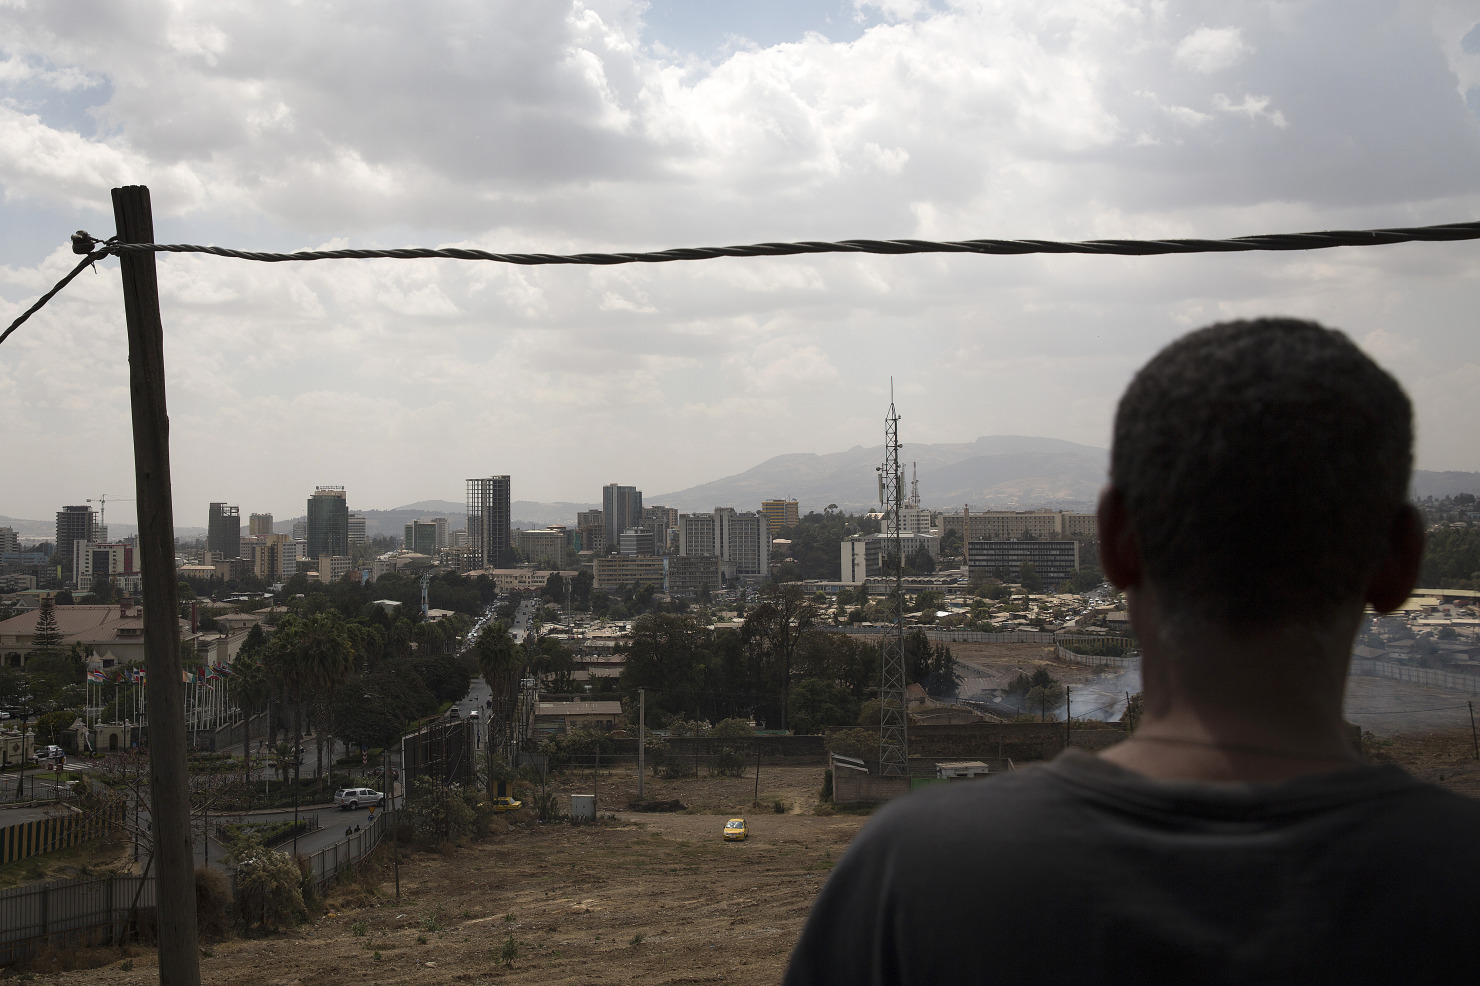 A pedestrian looks out over commercial and residential buildings on the city skyline in Addis Ababa.